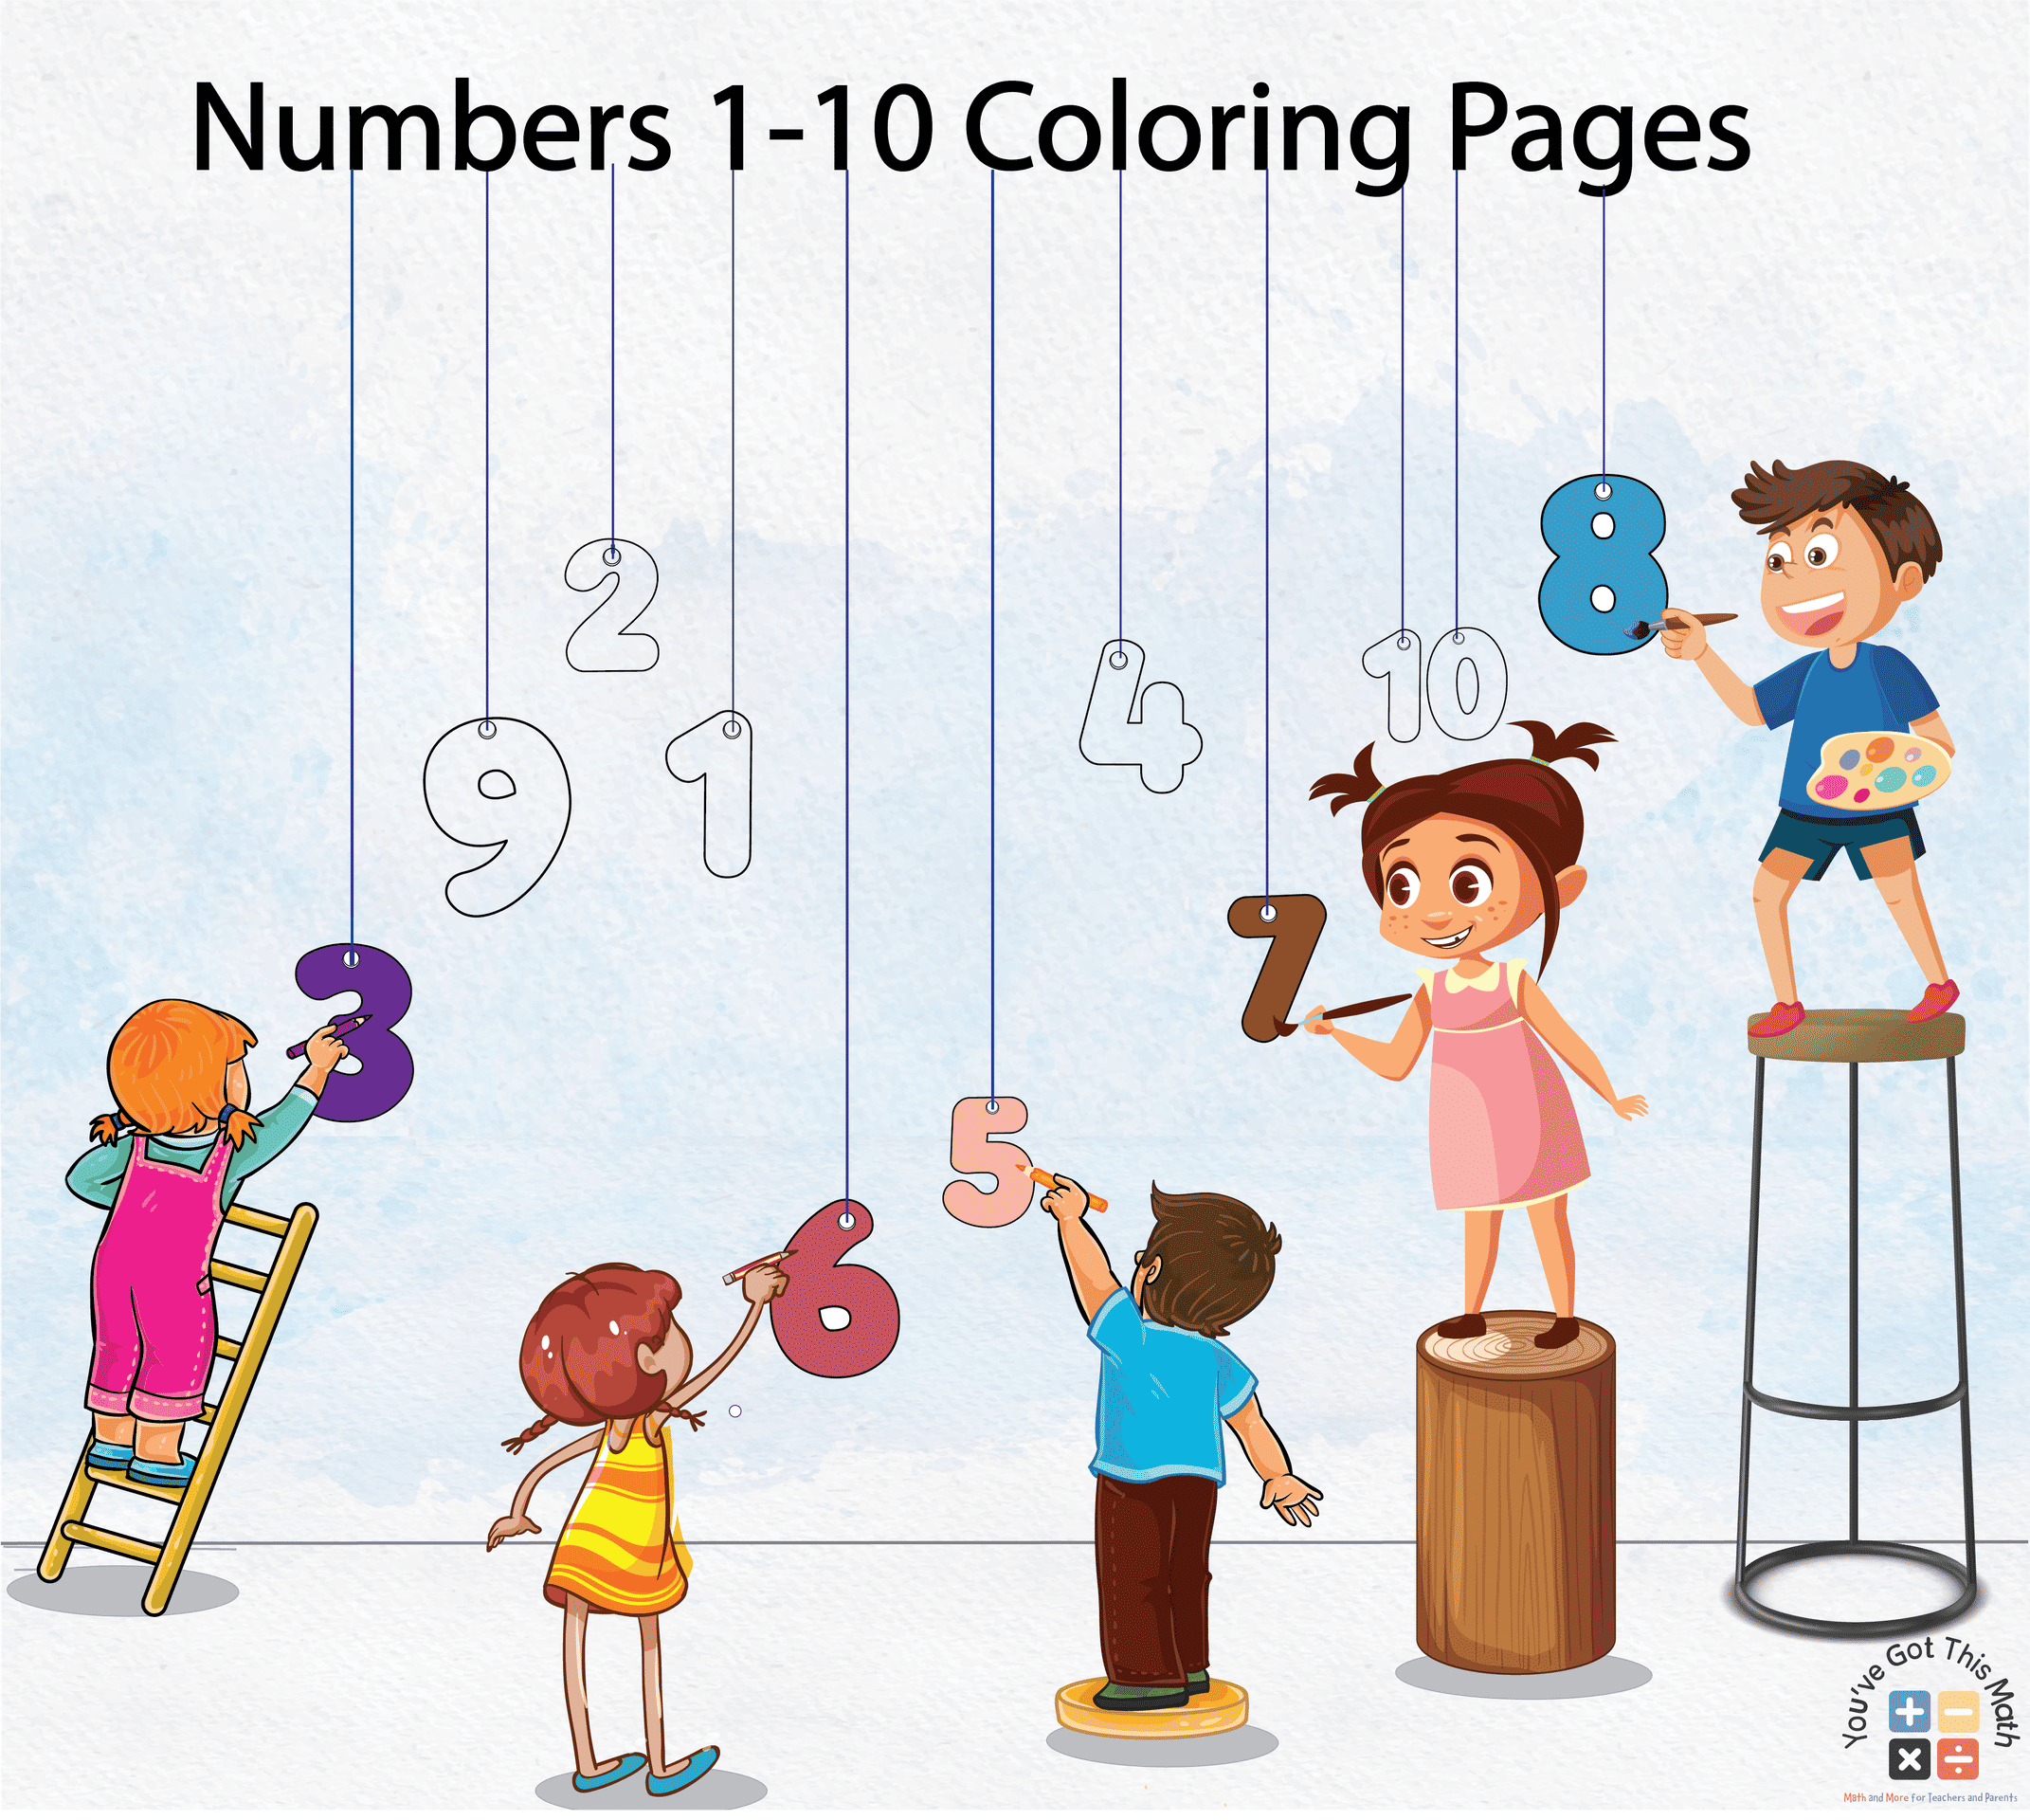 6 Numbers 1-10 Coloring Pages | Free Printable